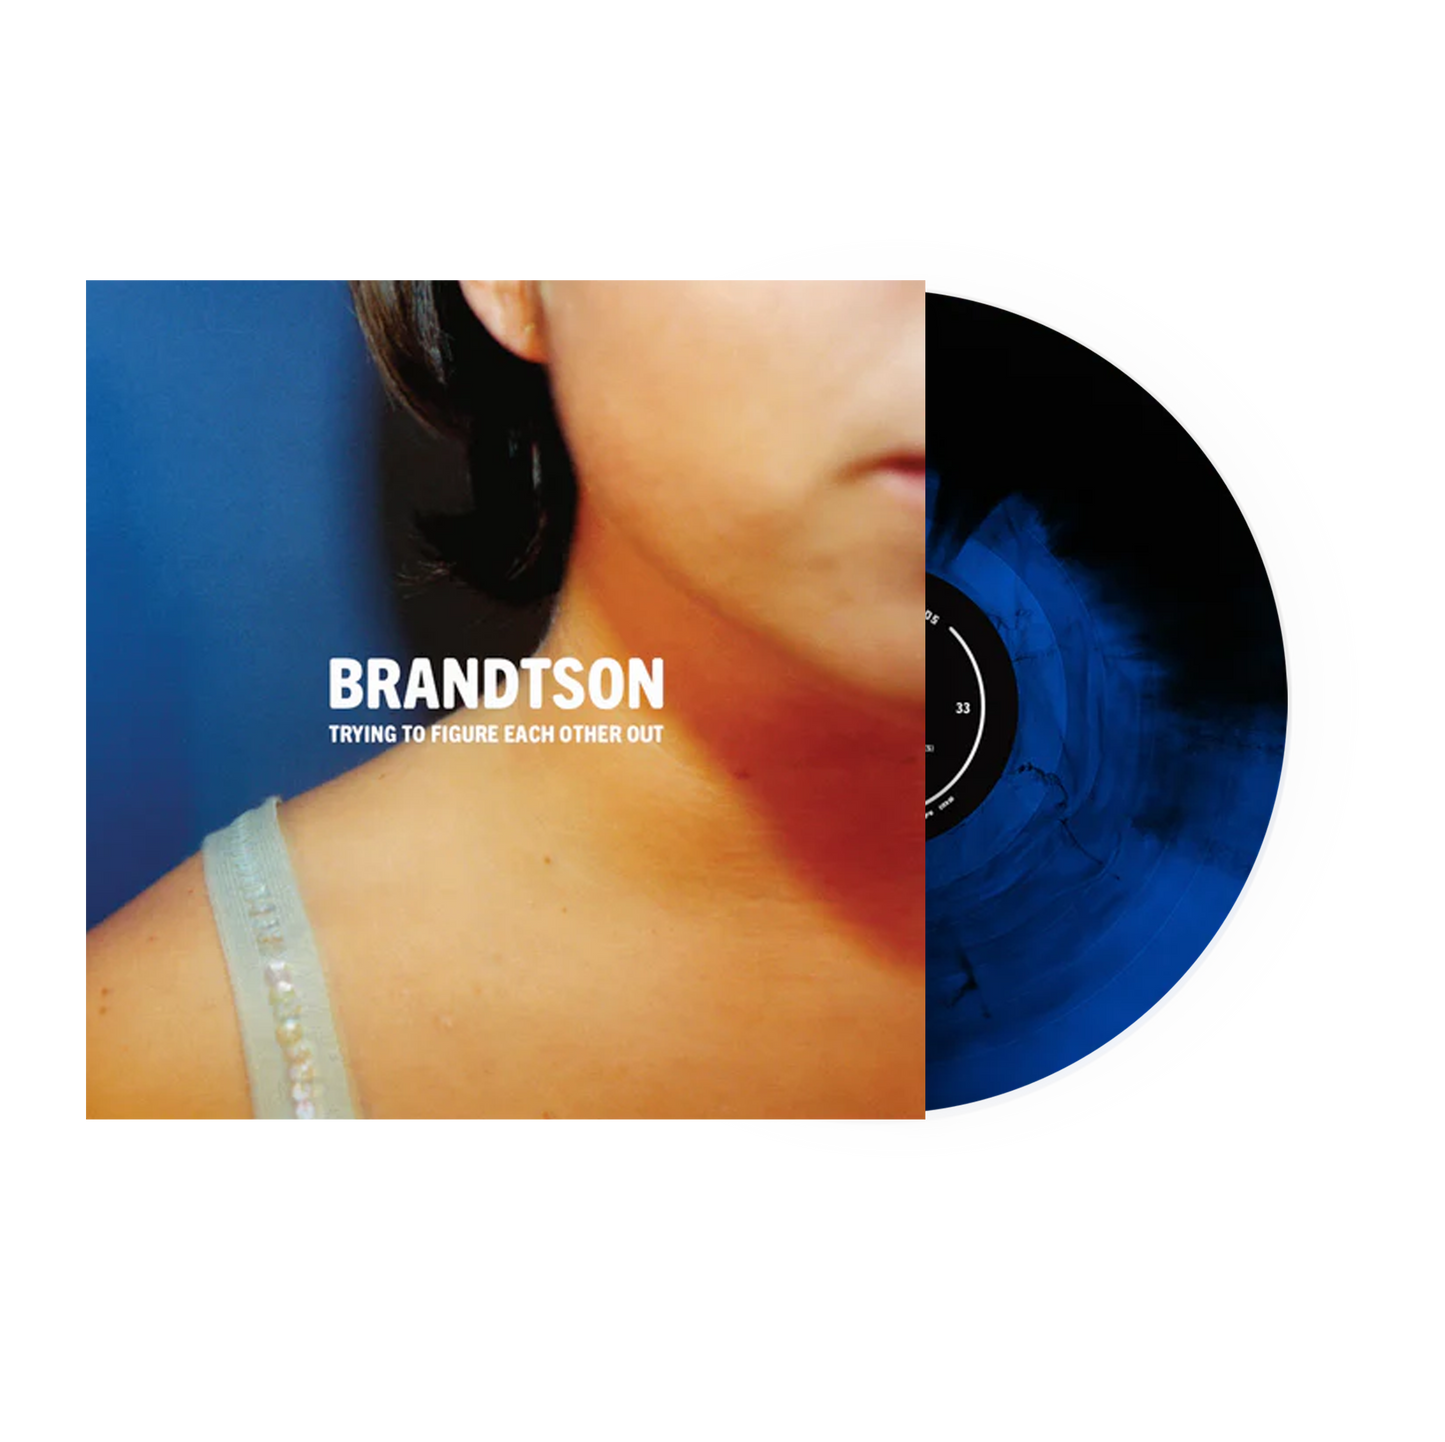 Brandtson "Trying To Figure Each Other Out" EP